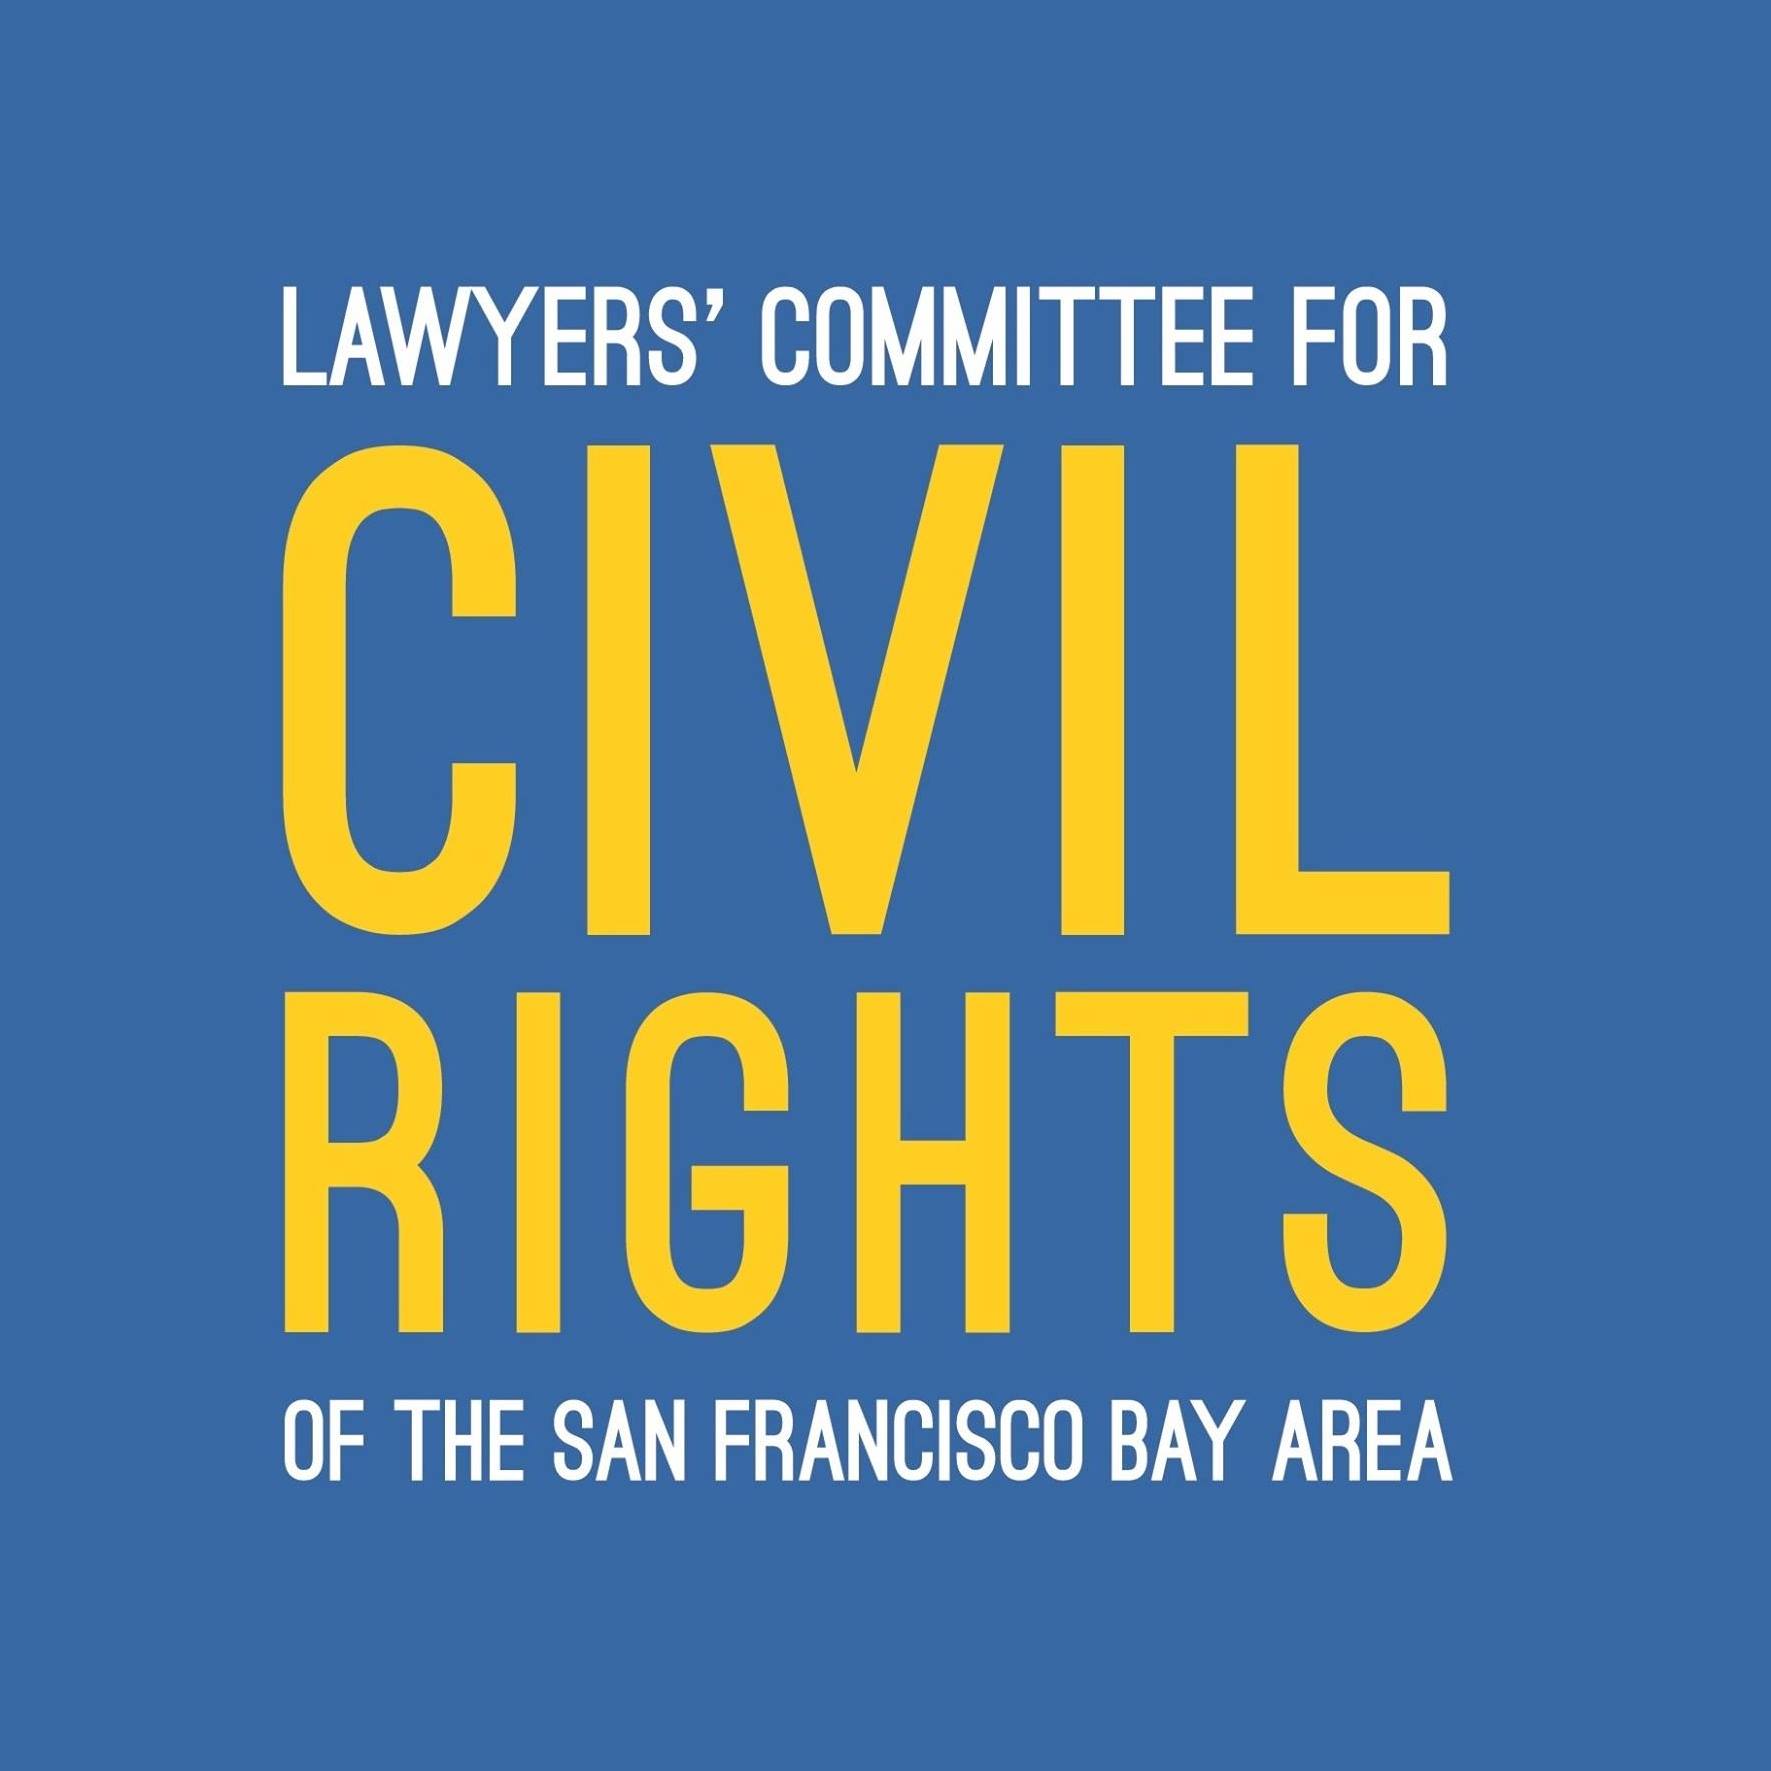 Lawyers' Committee for Civil Rights San Francisco Bay Area